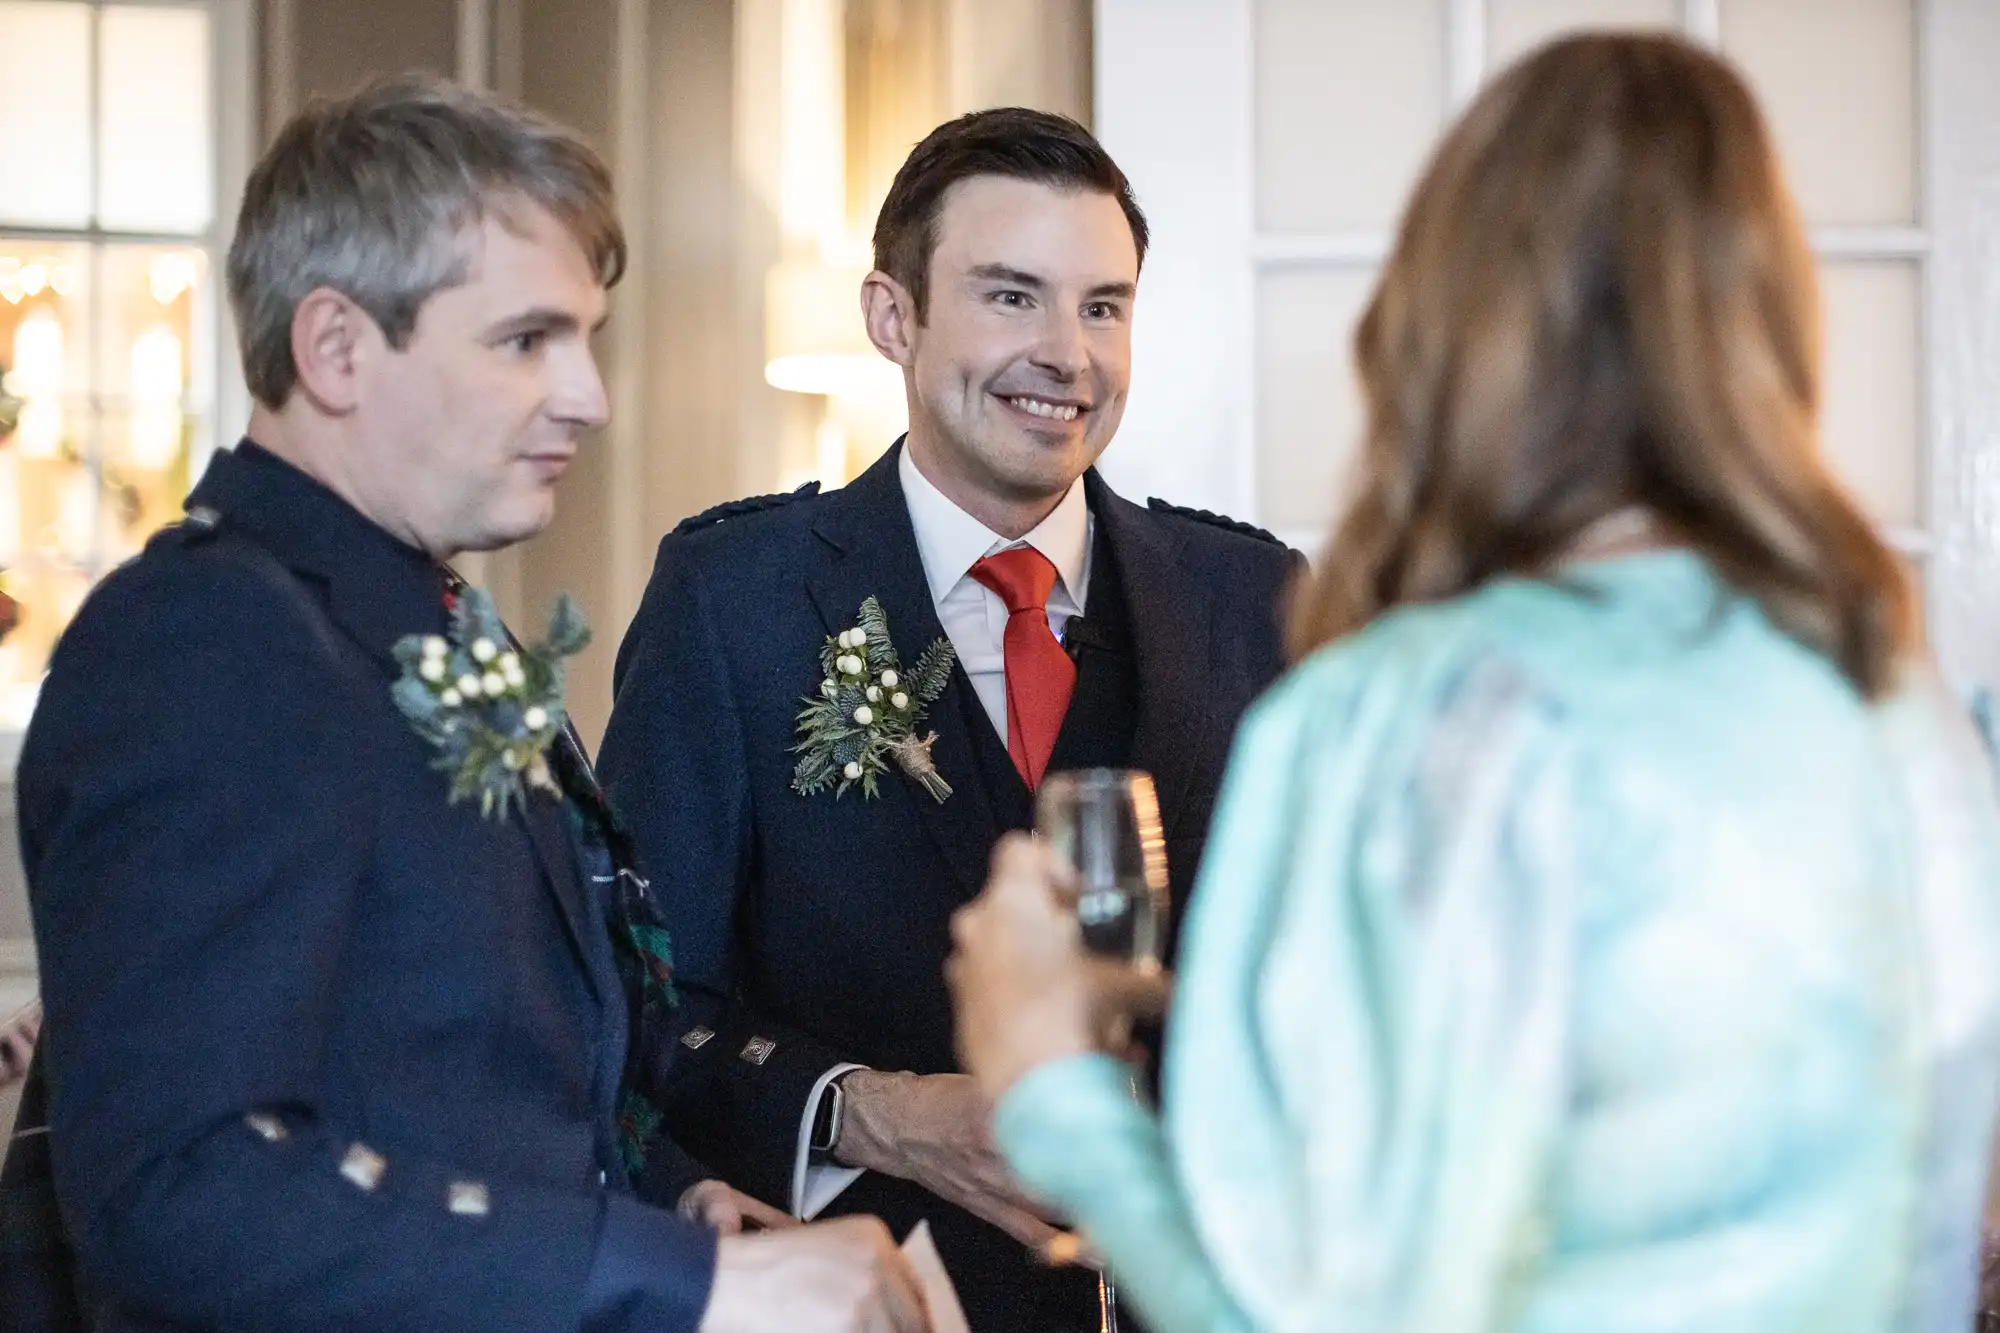 Two men in suits with floral boutonnieres are in conversation with a woman holding a drink at a social event.